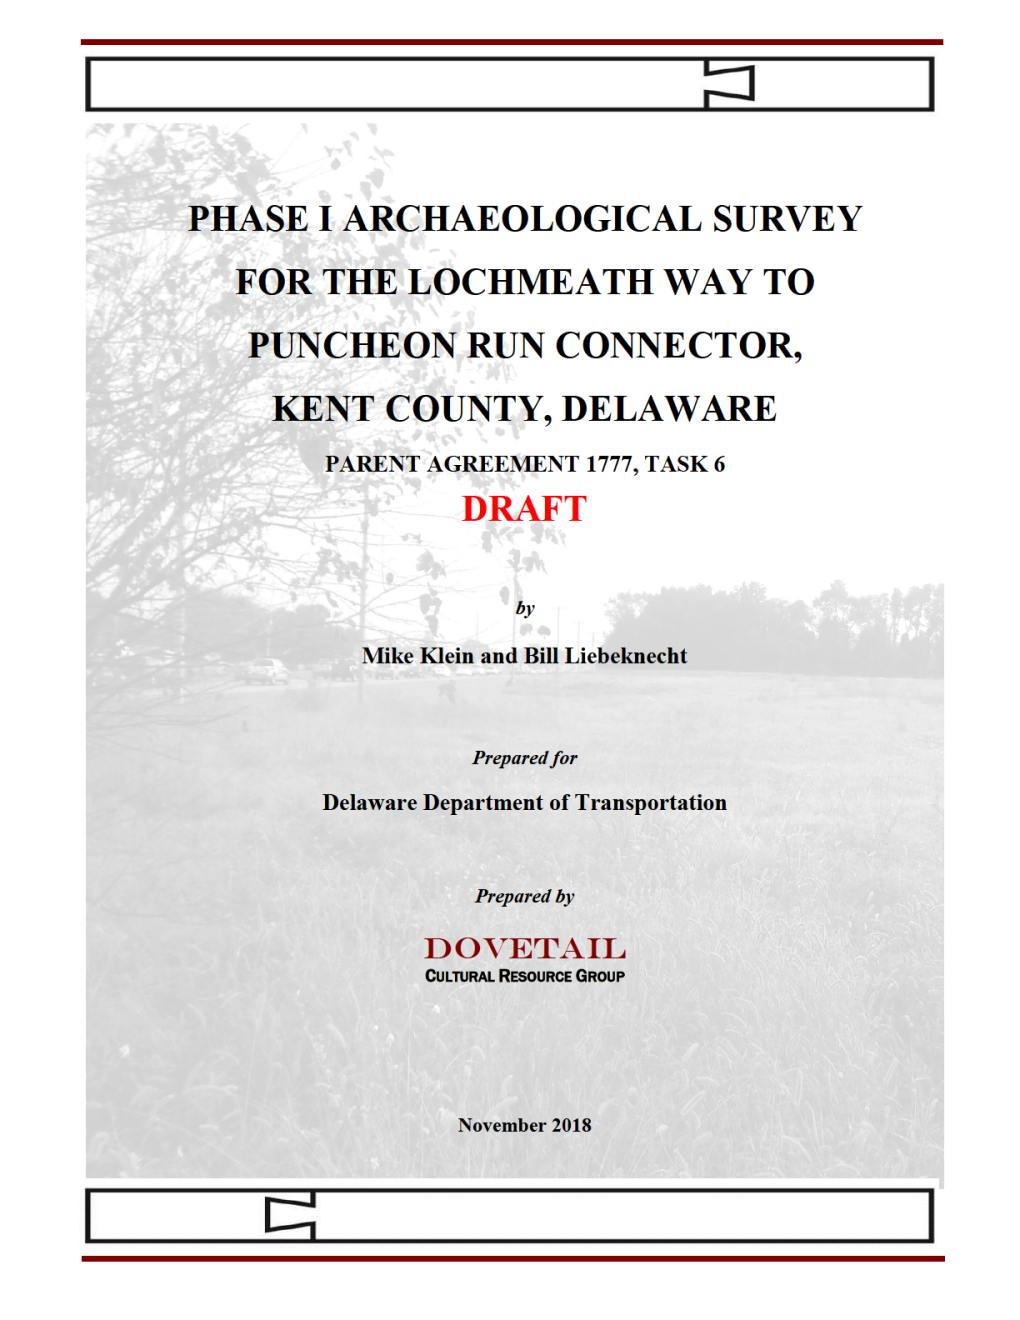 Results of the Phase I Archaeological Survey